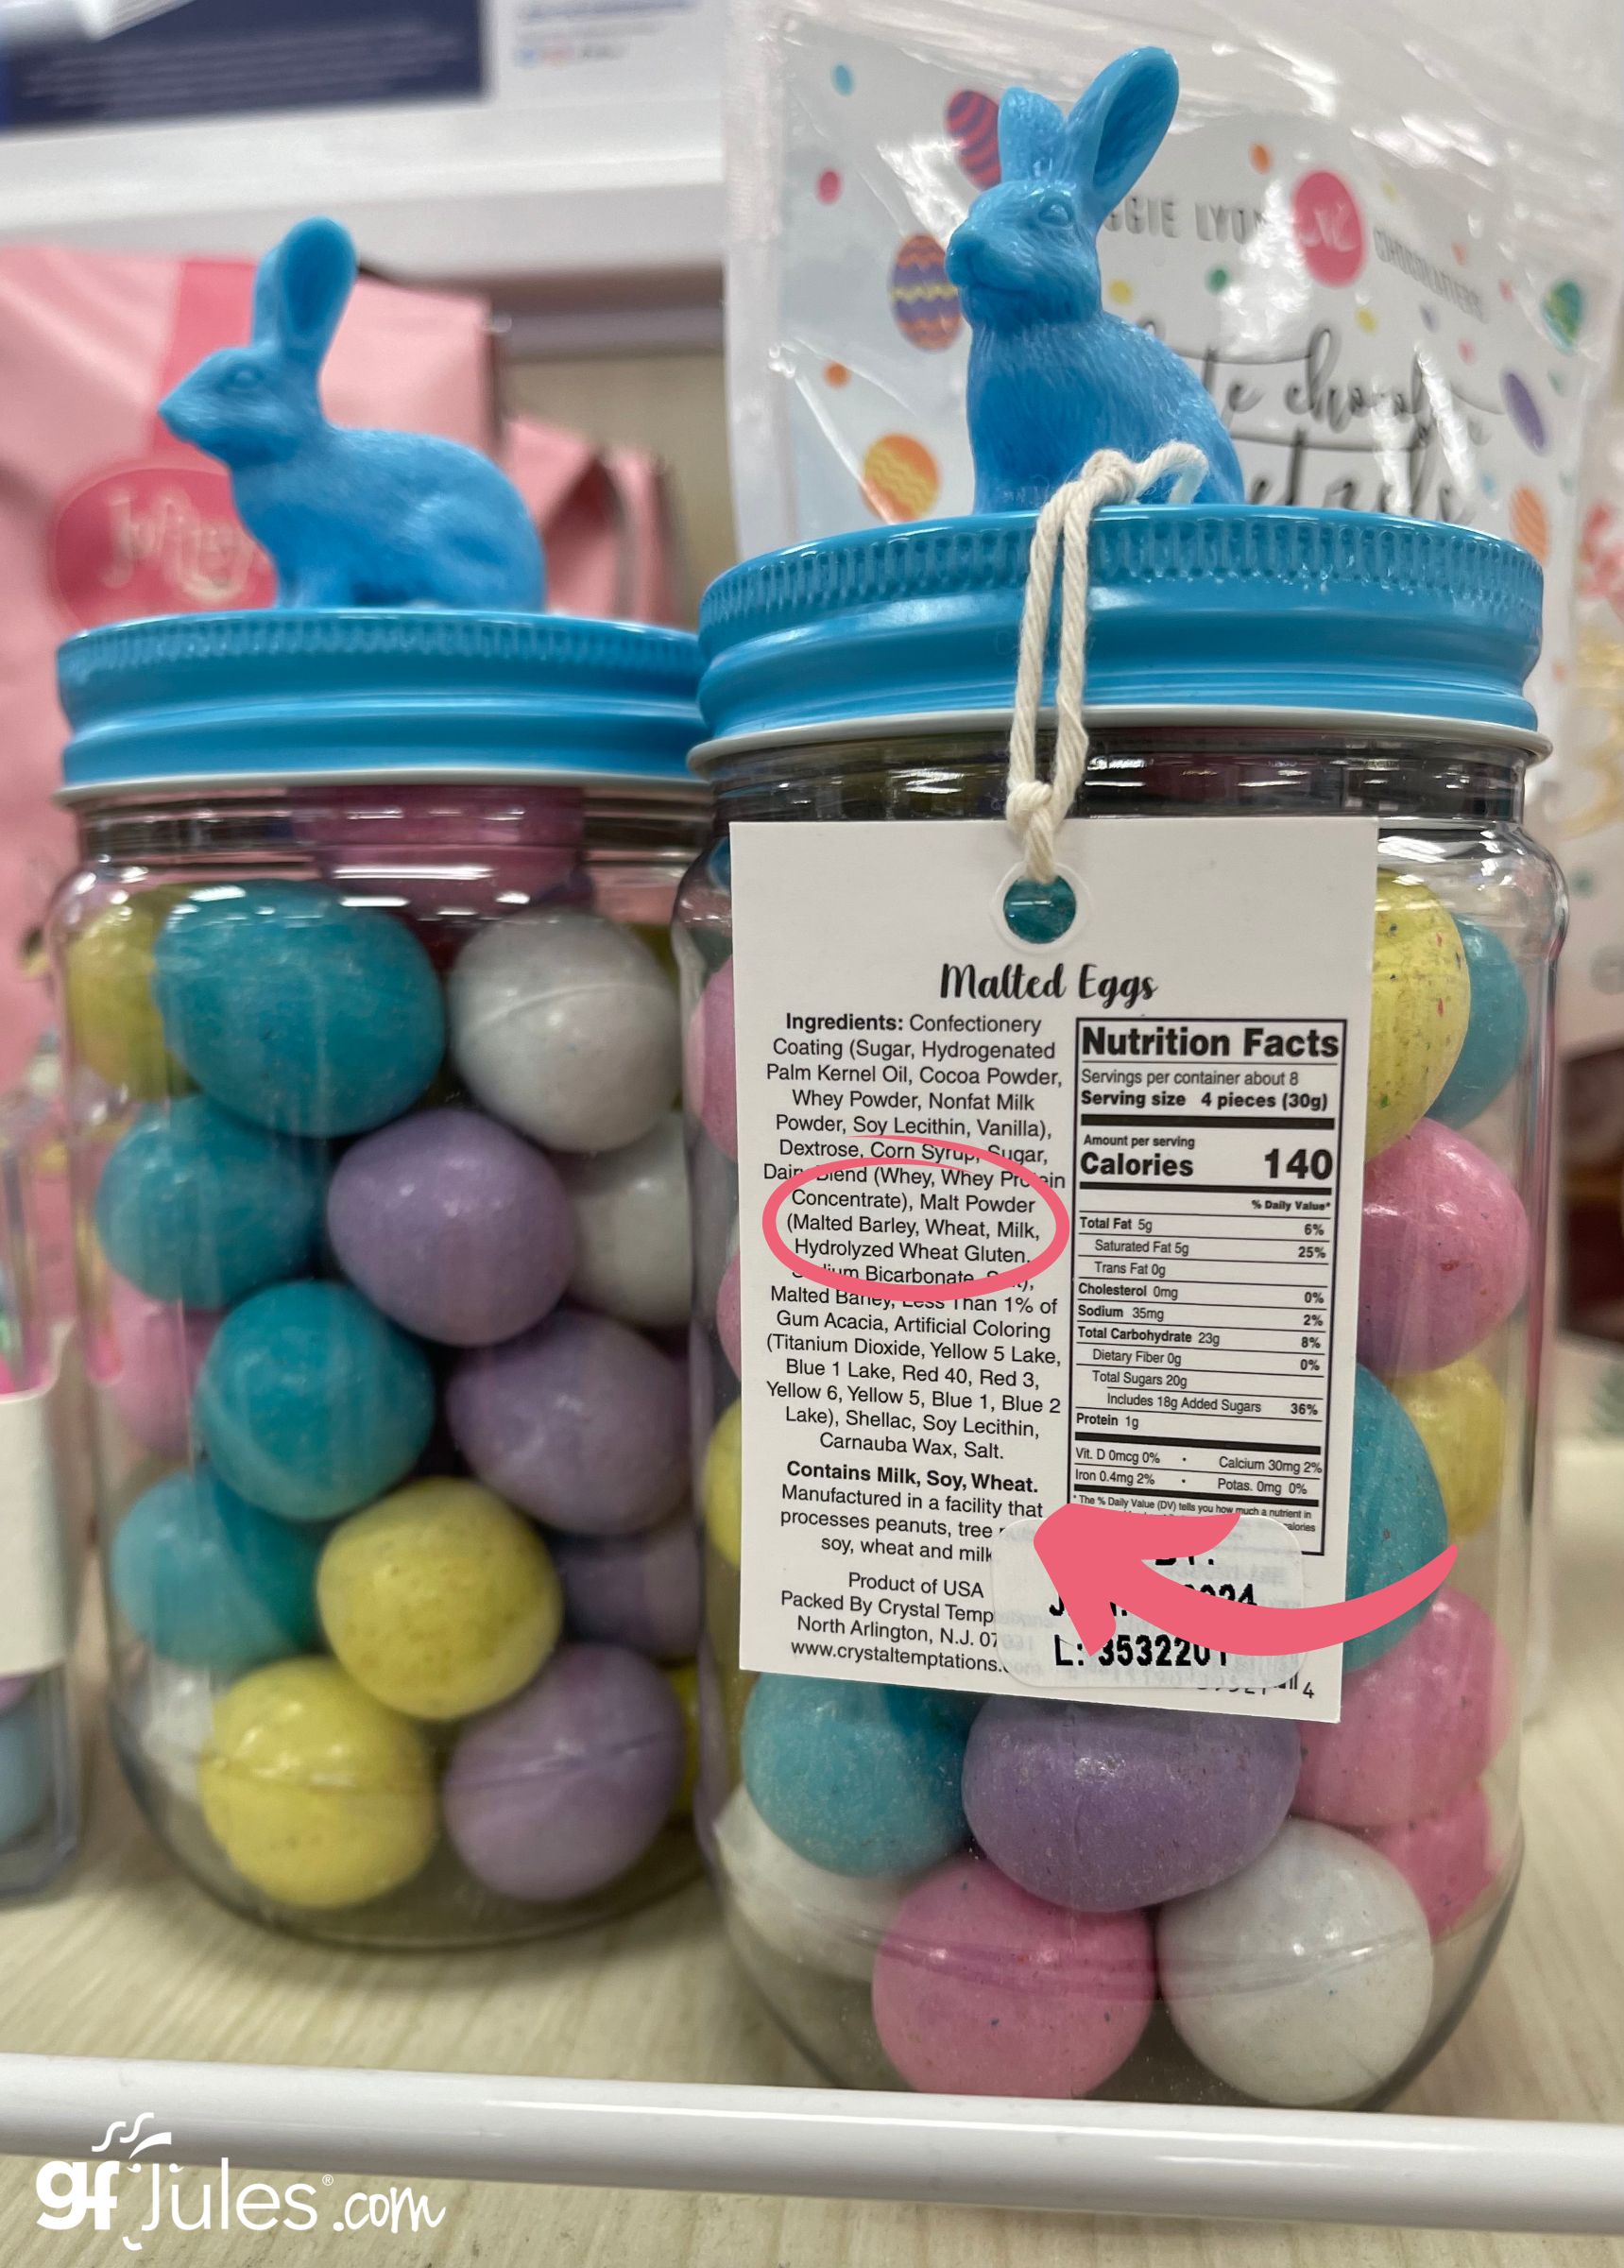 Easter candy containing malted barley - not gluten free